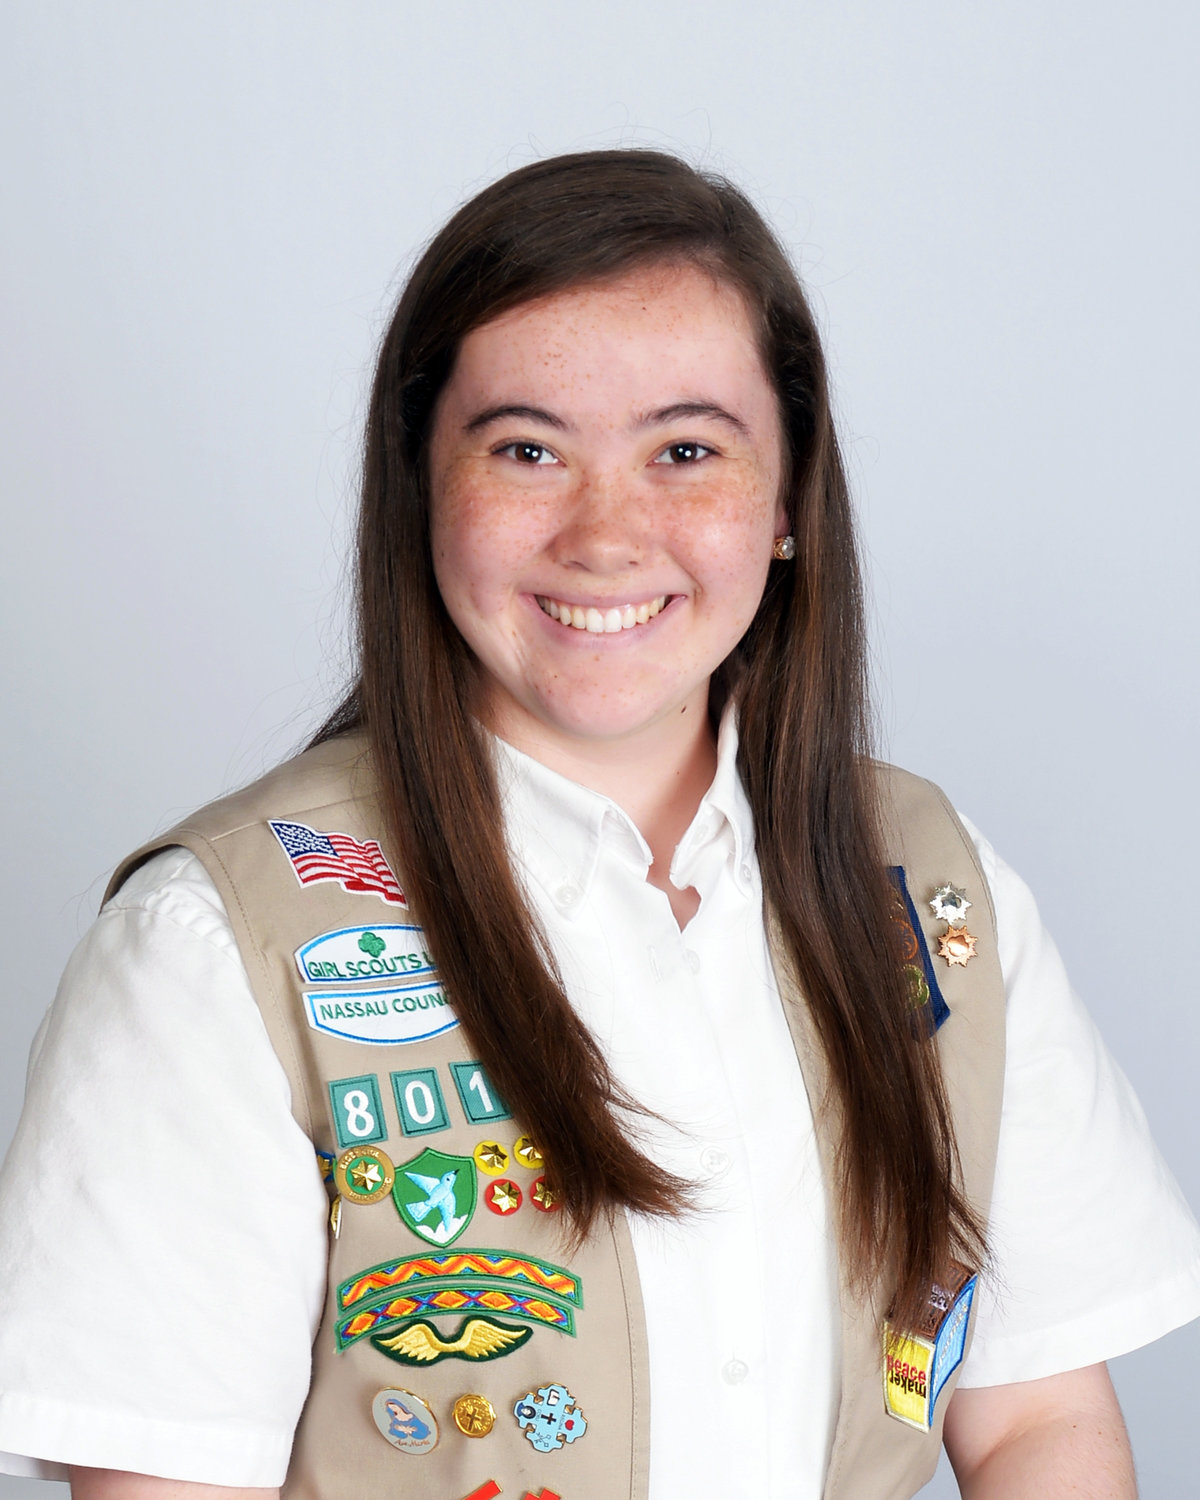 girl-scout-receives-award-for-her-work-herald-community-newspapers-liherald